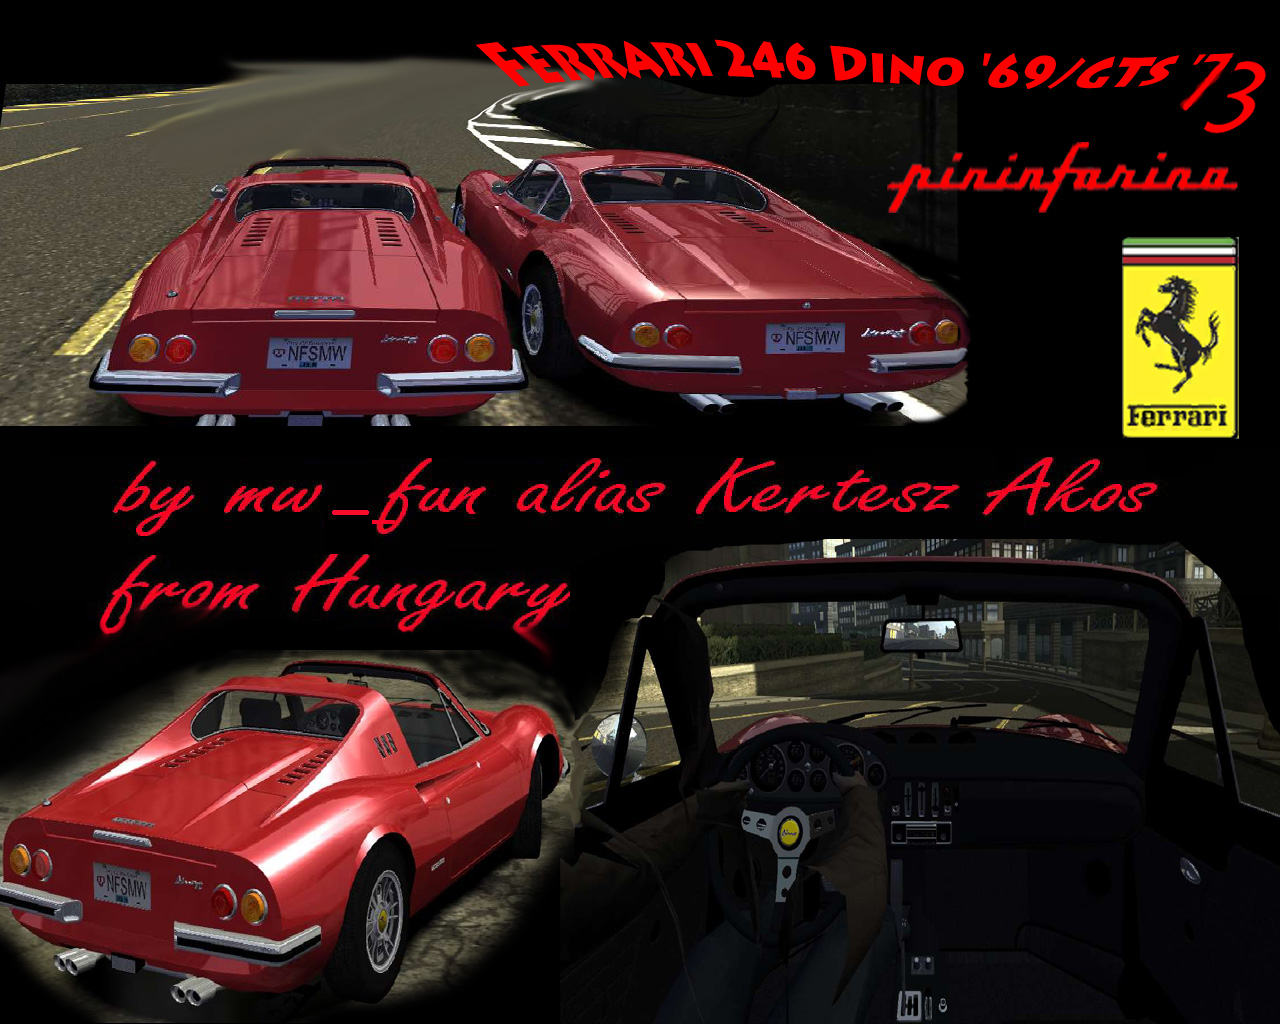 Need For Speed Most Wanted Ferrari 246 Dino '69/GTS '73